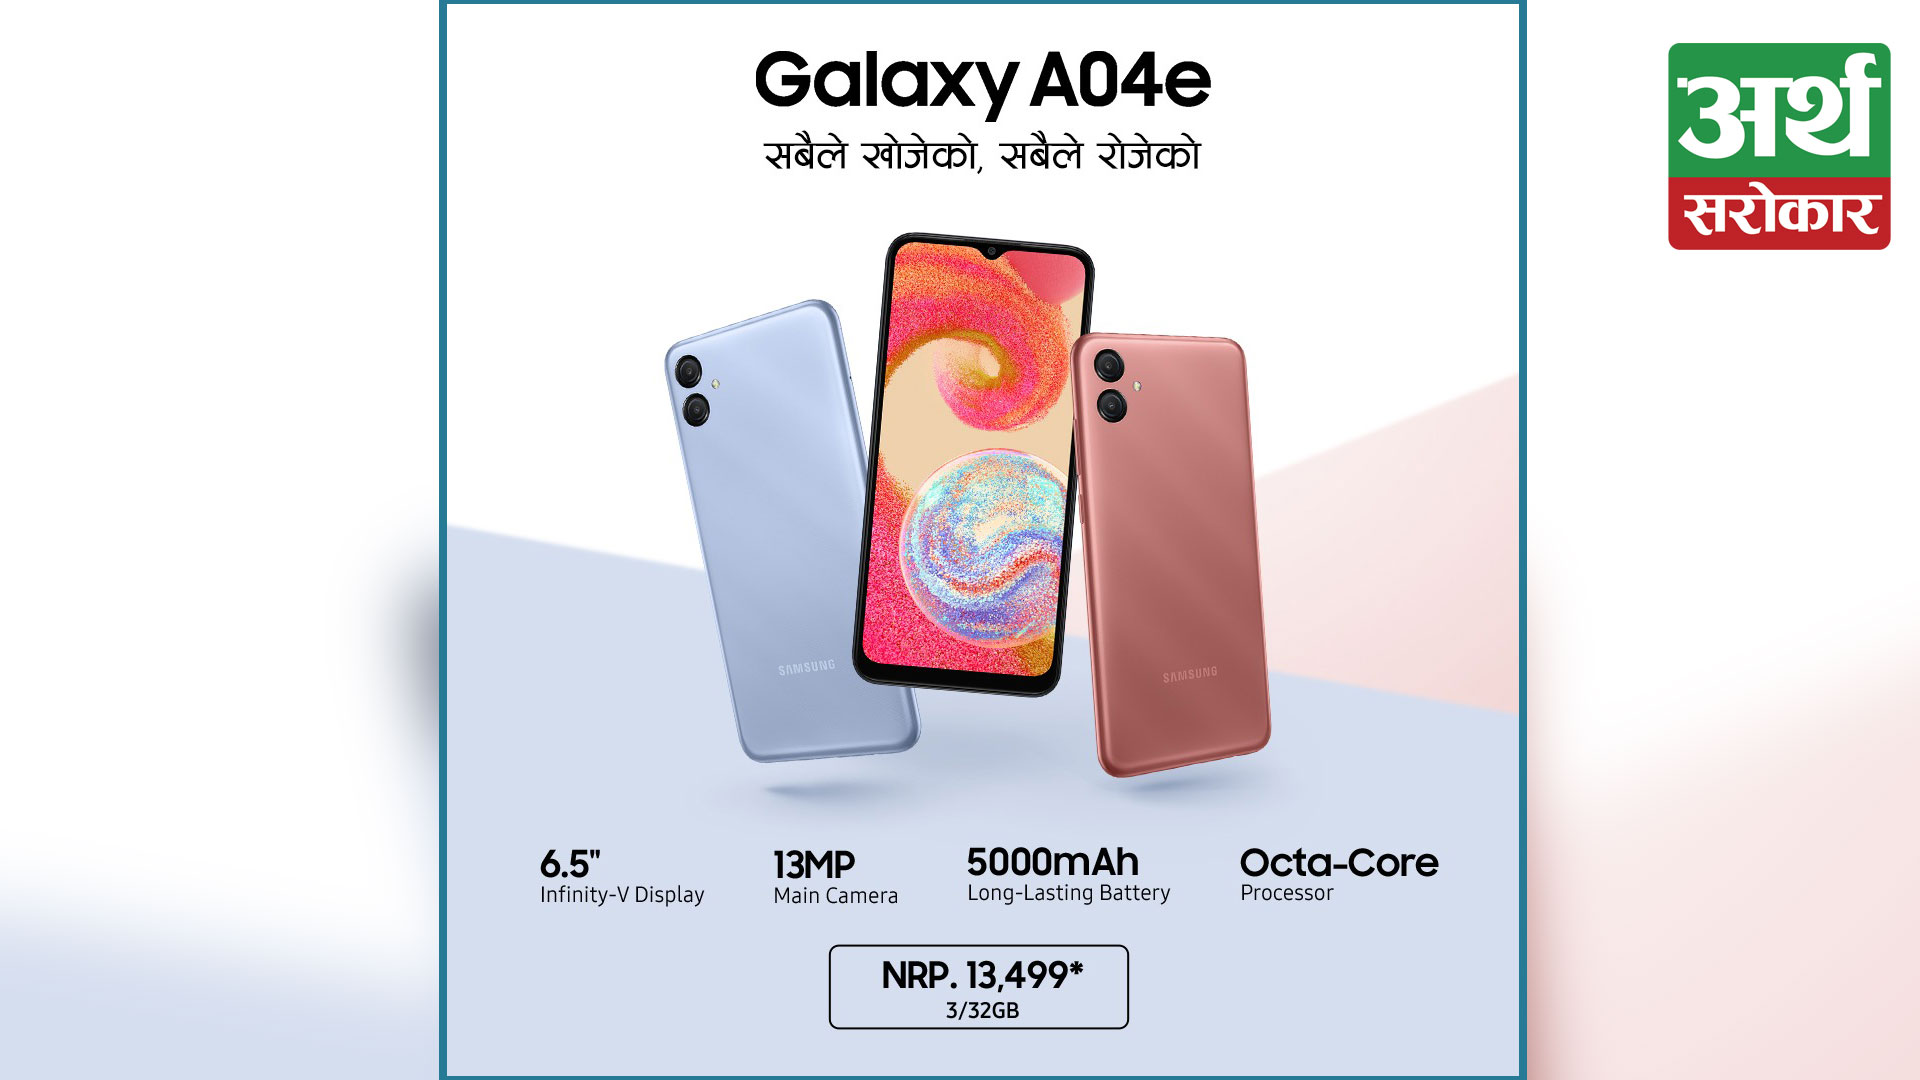  A Well-Rounded device for everyone | The Galaxy A04e